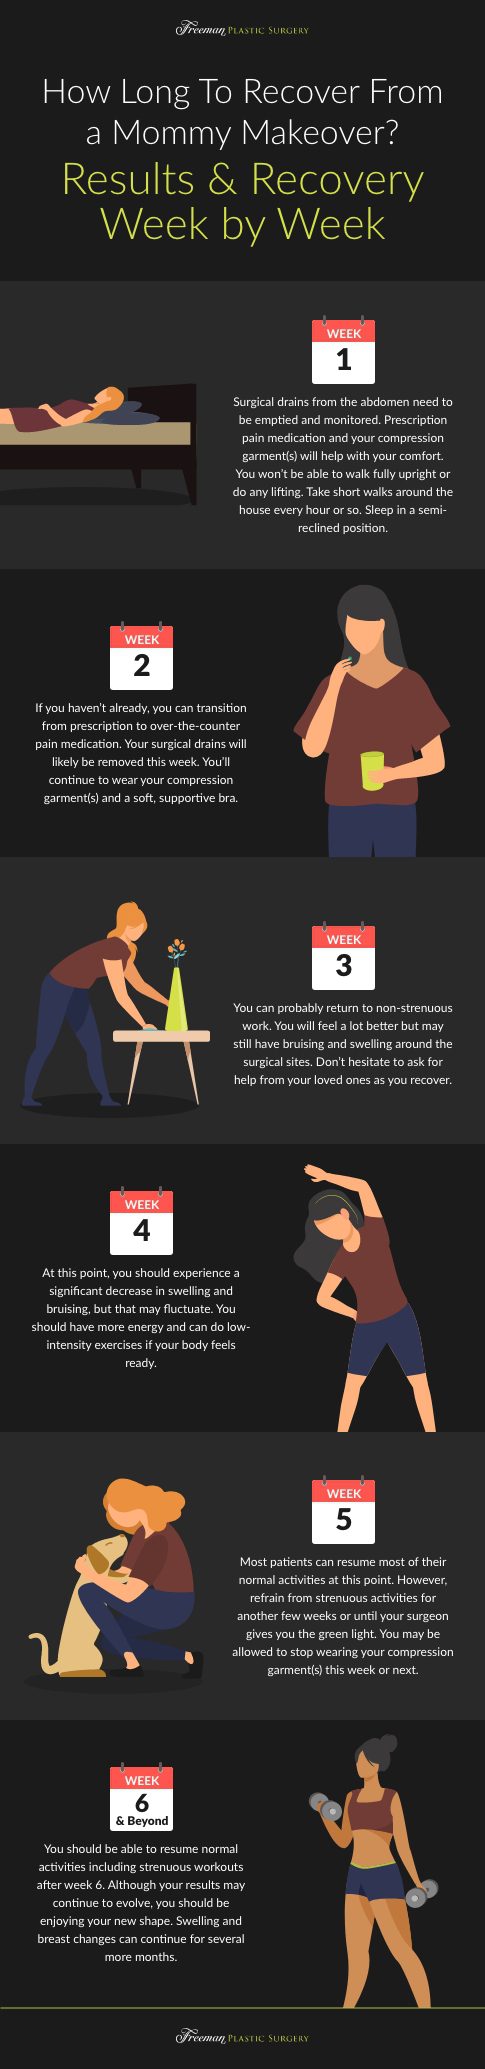 How Long To Recover From A Mommy Makeover Results And Recovery Week By Week Infographic Mark 